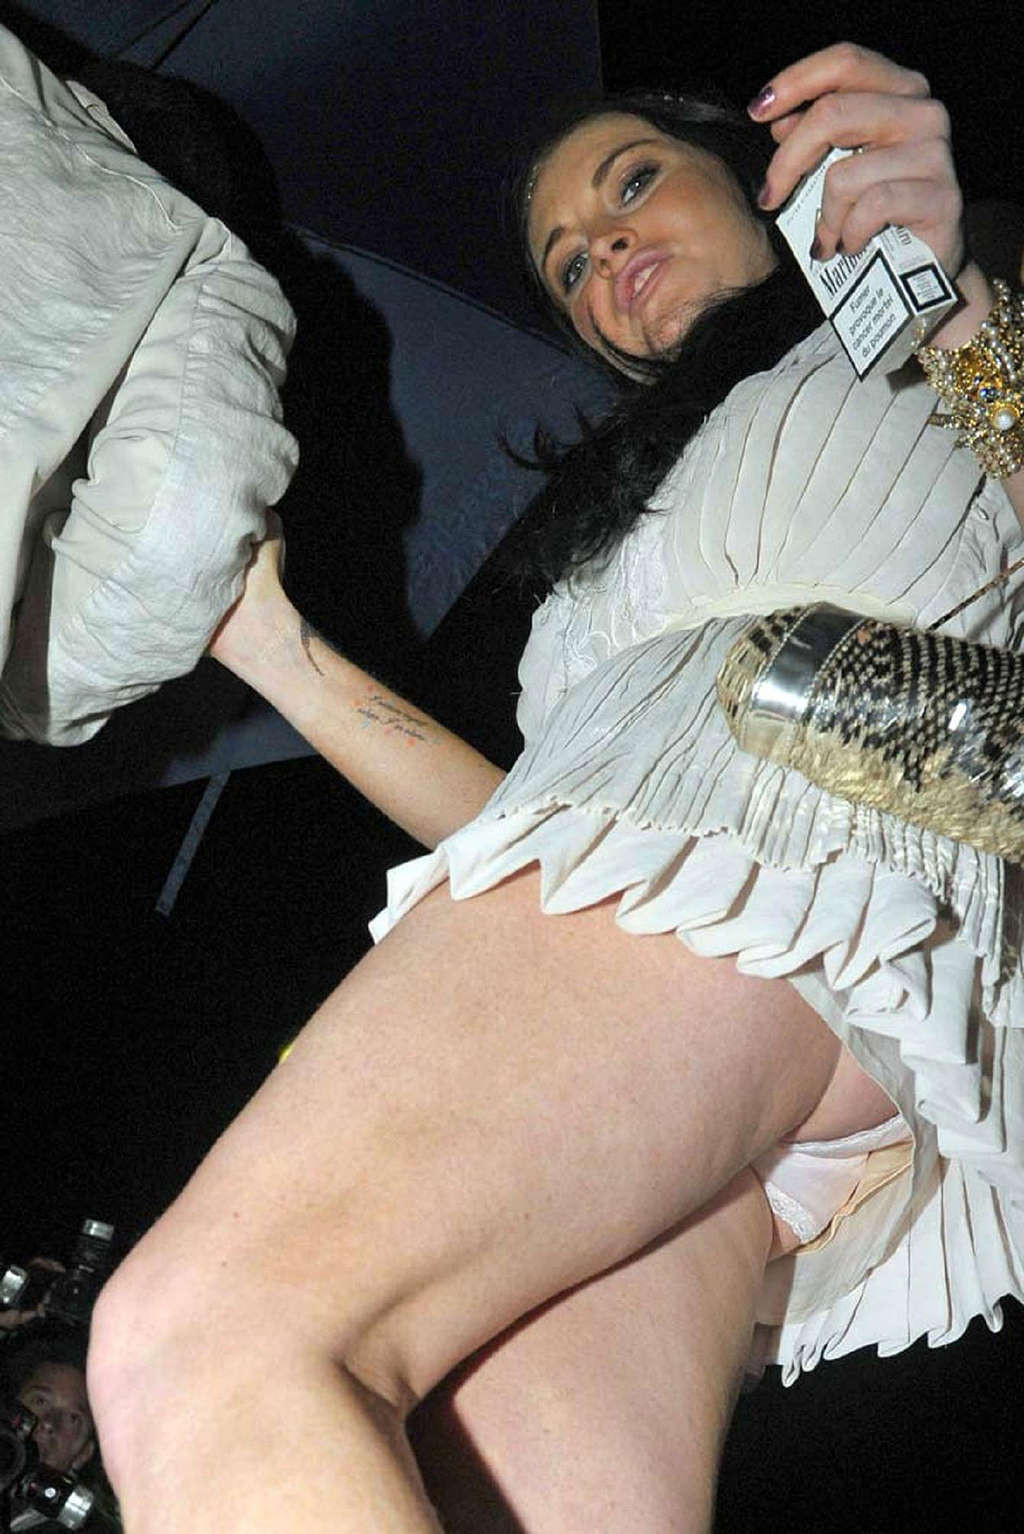 Lindsay lohan in posa in topless per alcuni photoshoot e upskirt
 #75346358